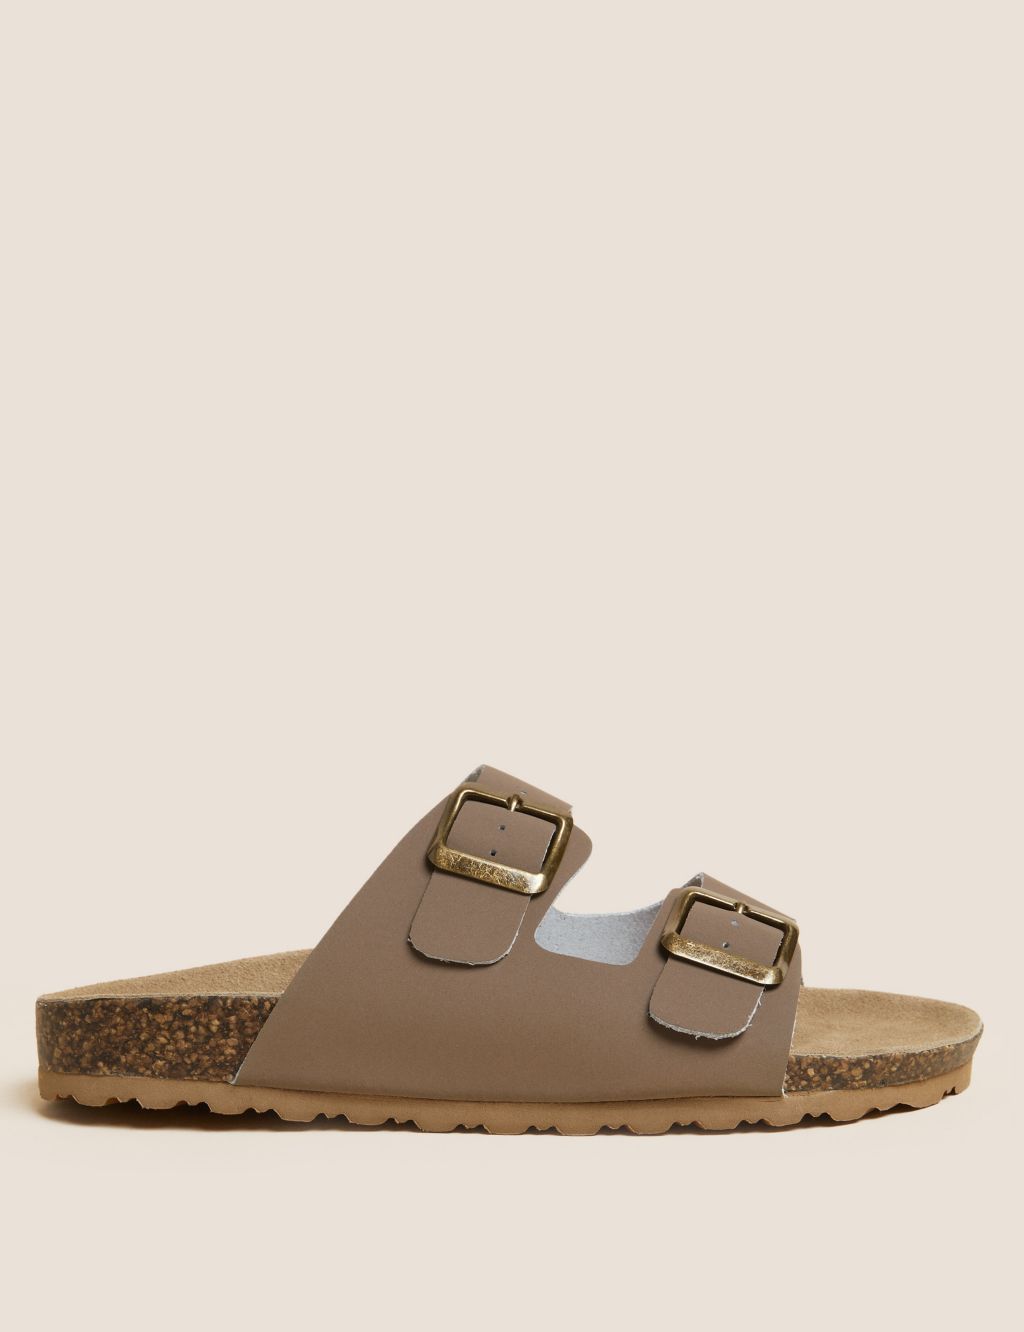 Leather Footbed Sandals Mid image 1